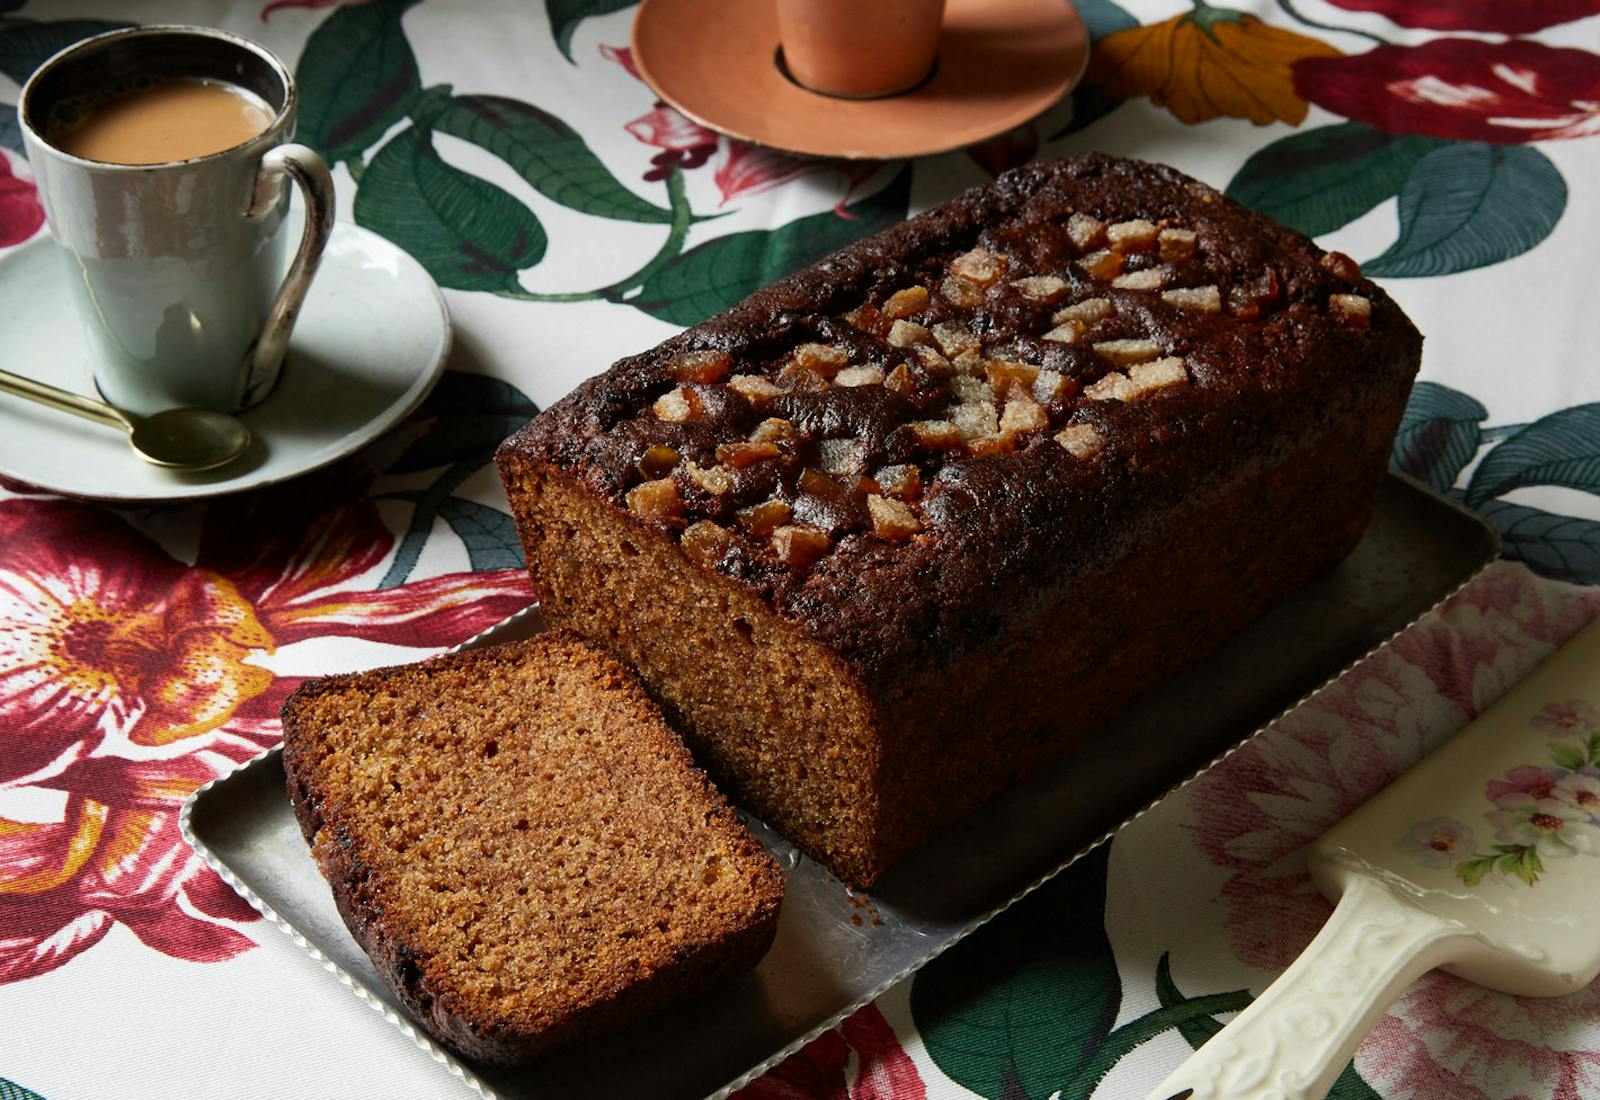 Persimmon loaf on tin plate alongside mugs of coffee, atop floral tablecloth.